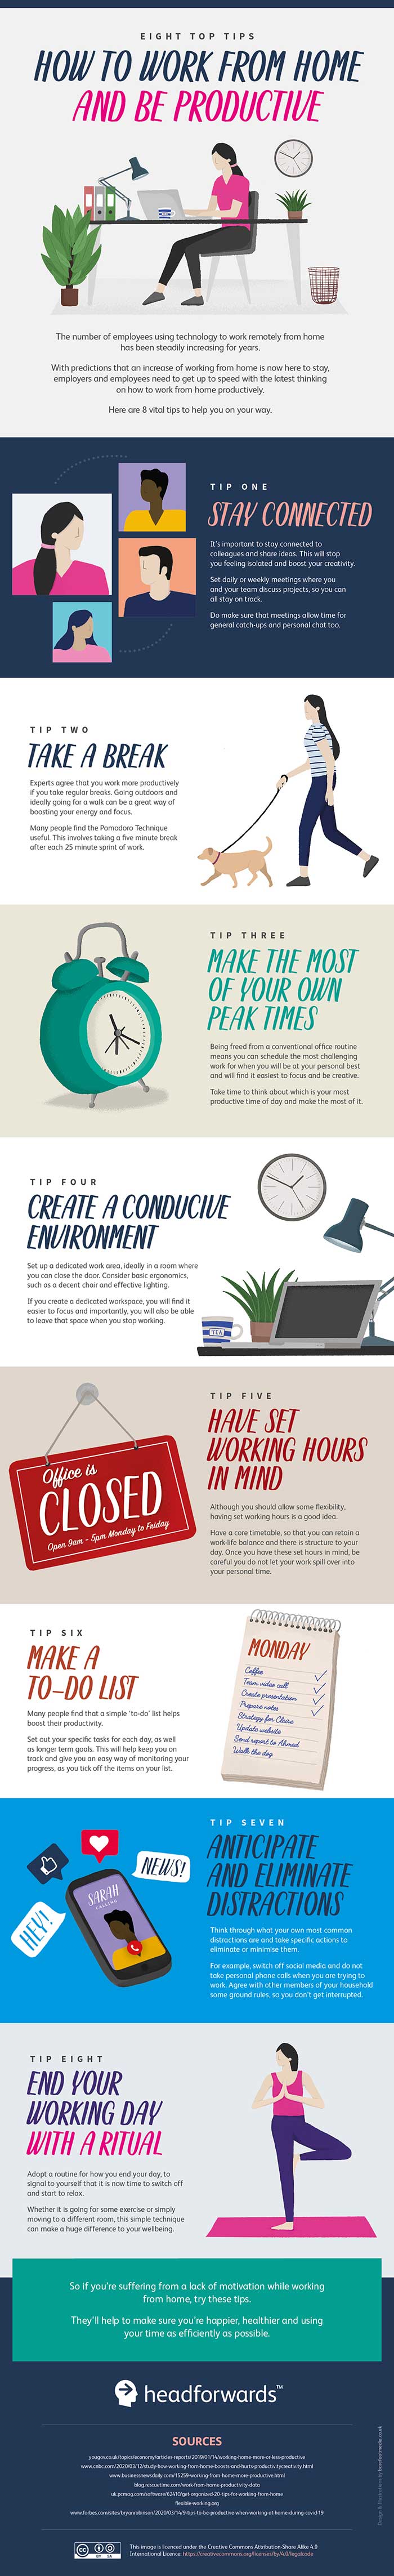 8 tips to be productive when working from home